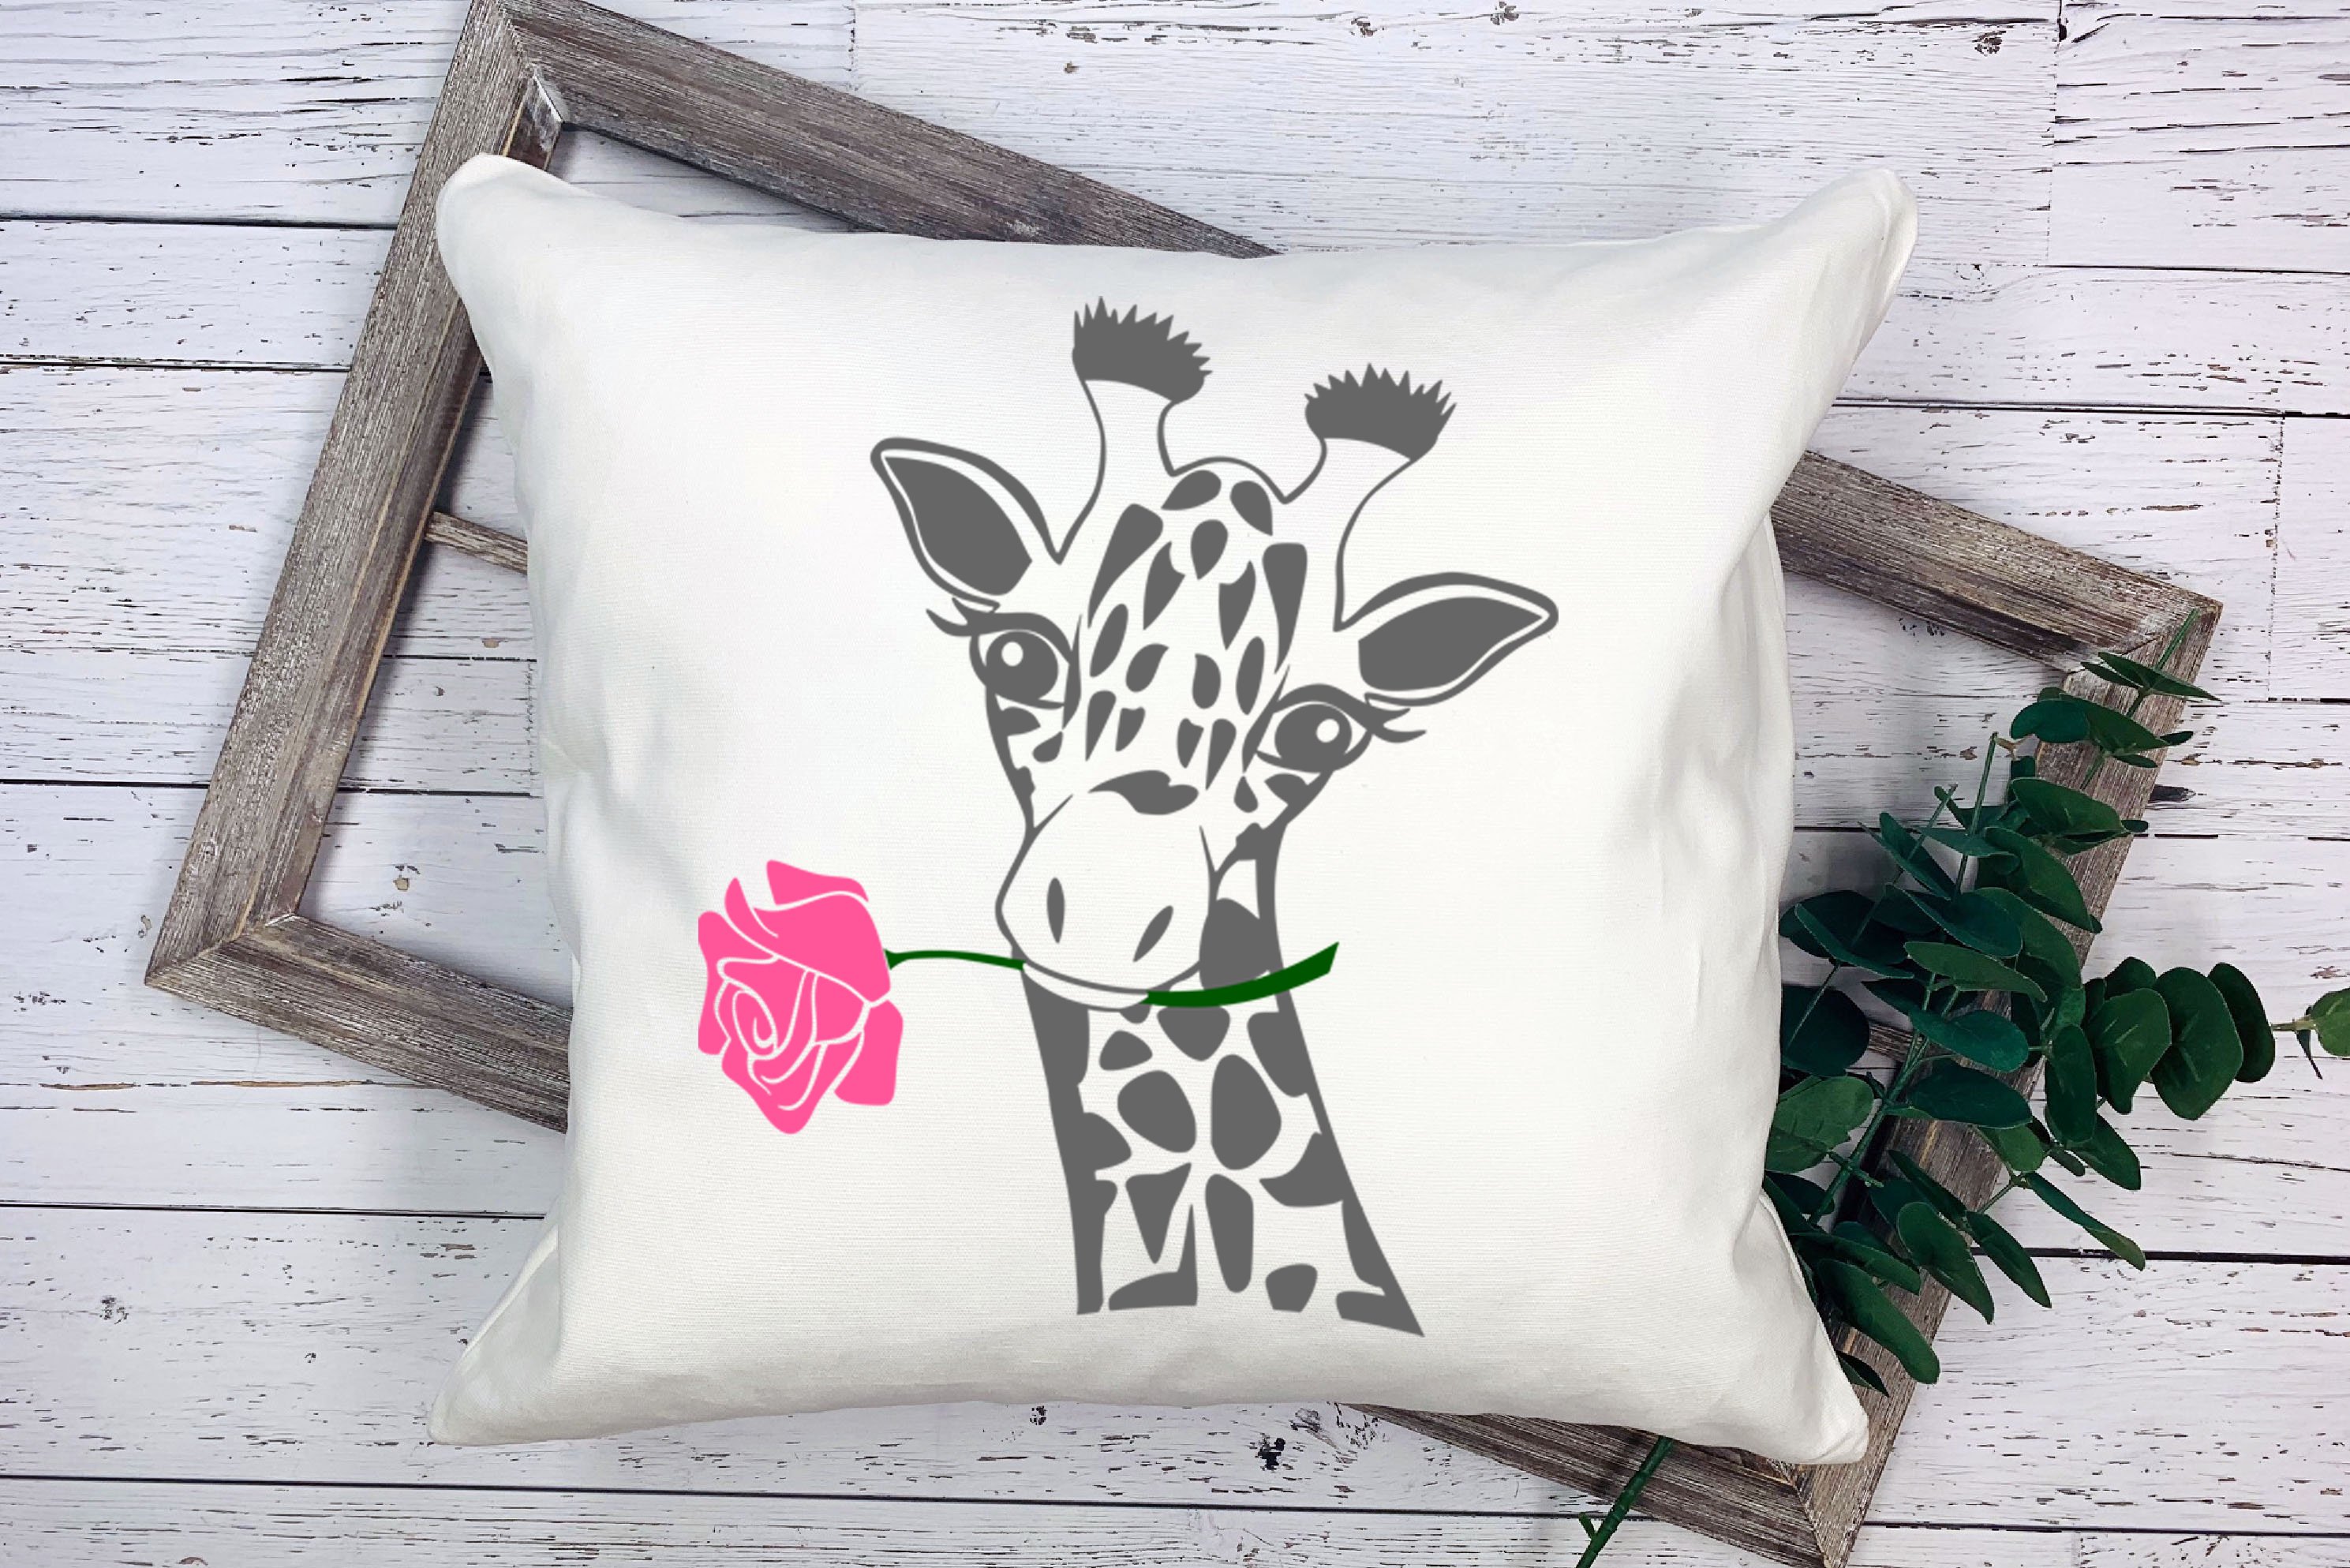 Pillow with a giraffe and a rose on it.